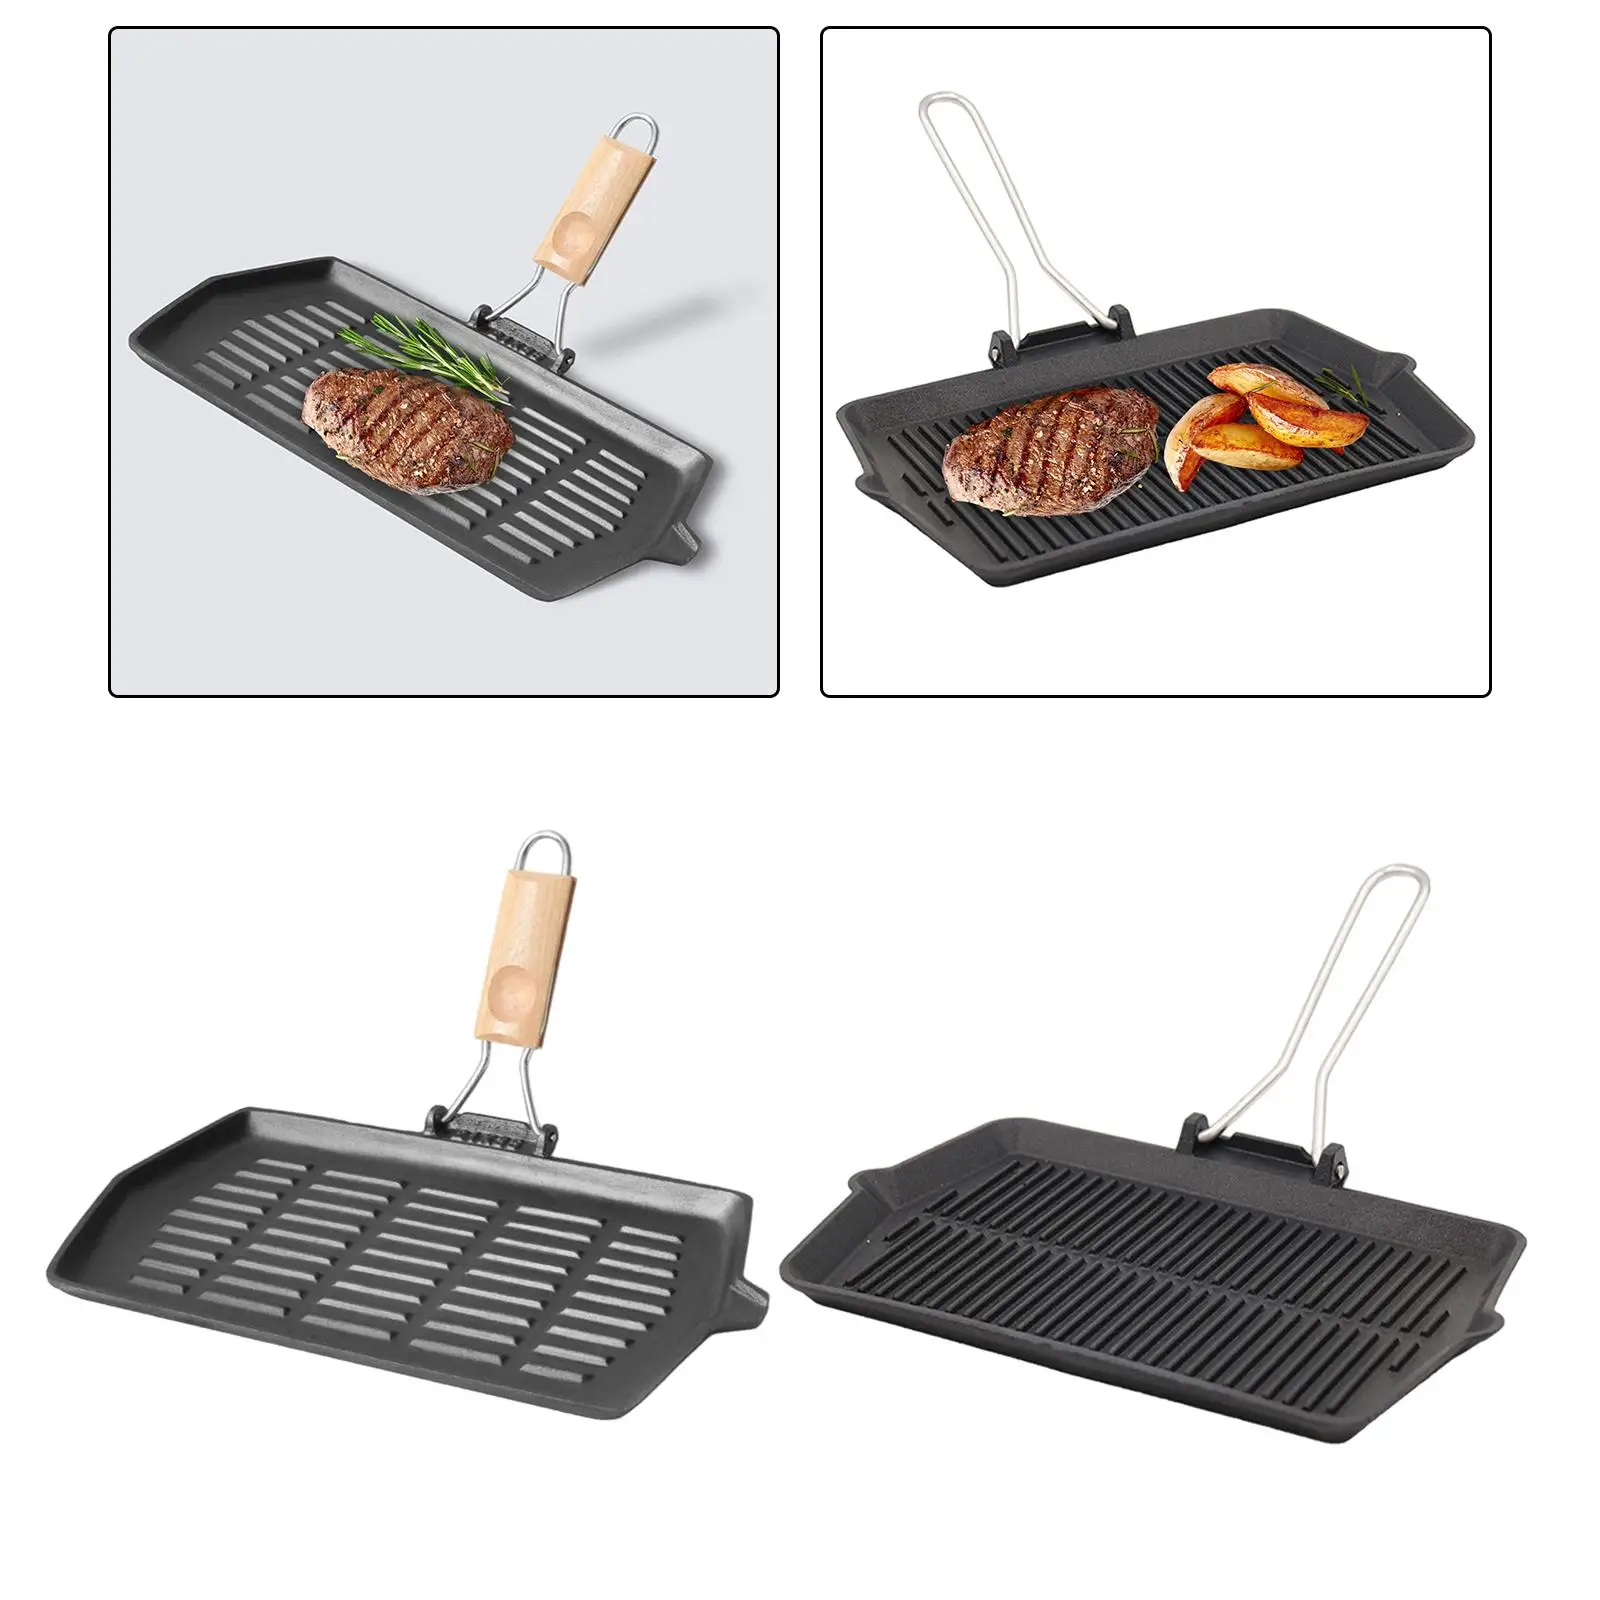 Steak Pan for Meat, Fish and Vegetables Grill Pan Frying Pan Griddle Pan for Restaurant Indoor Outdoor Household Kitchen